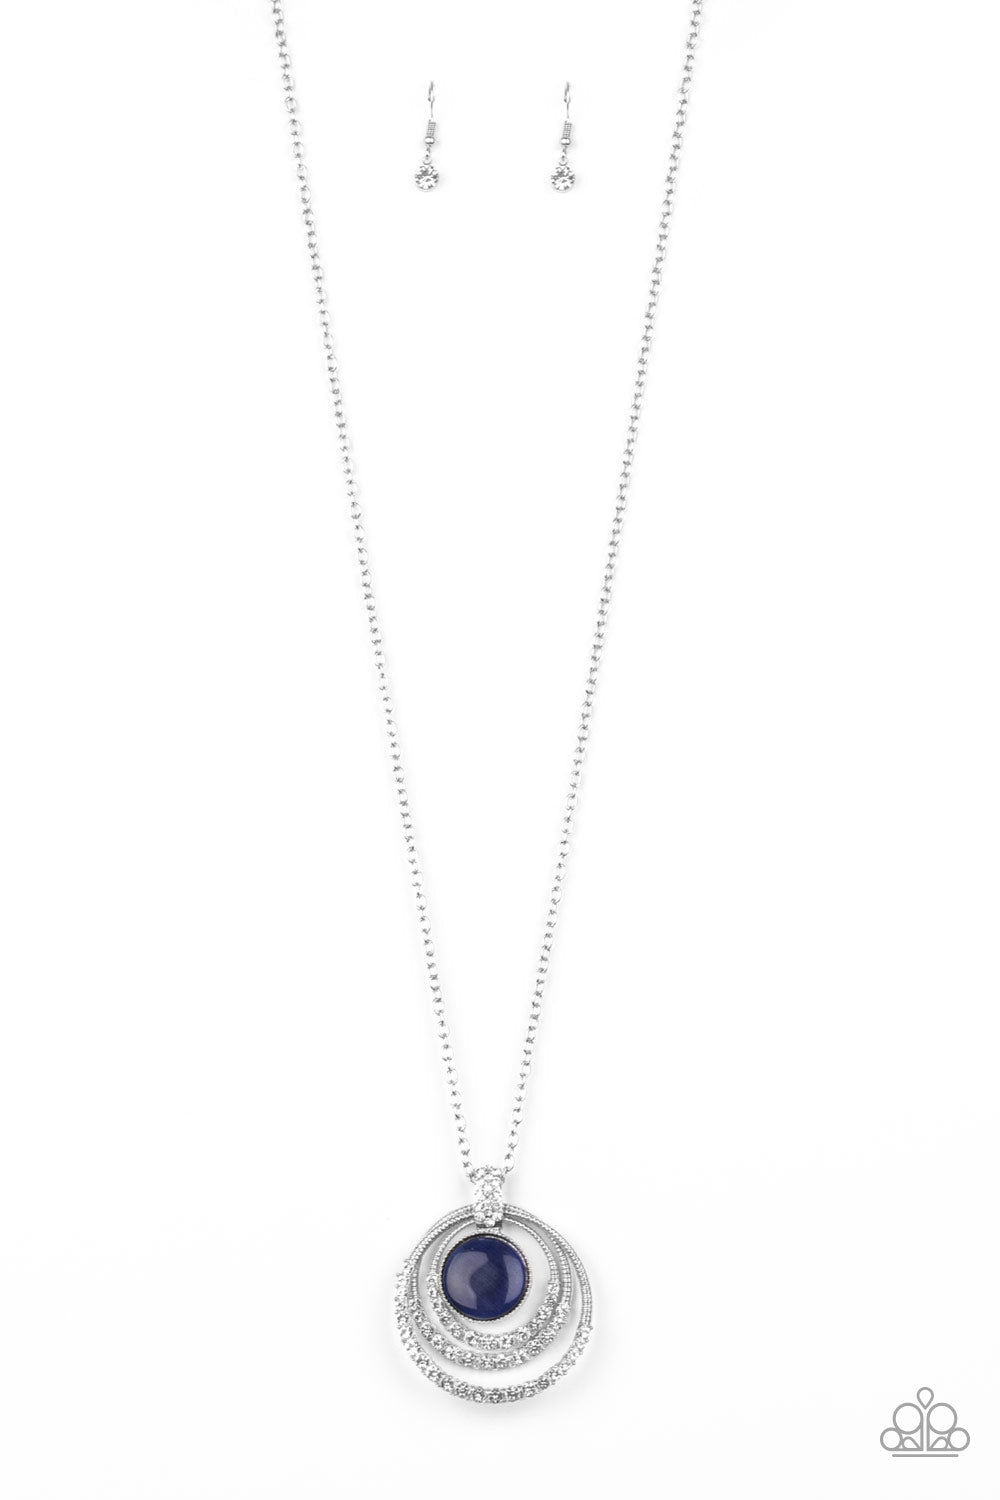 A DIAMOND A DAY - BLUE MOONSTONE CAT EYE TRIPLE FLOATING CIRCLES NECKLACE